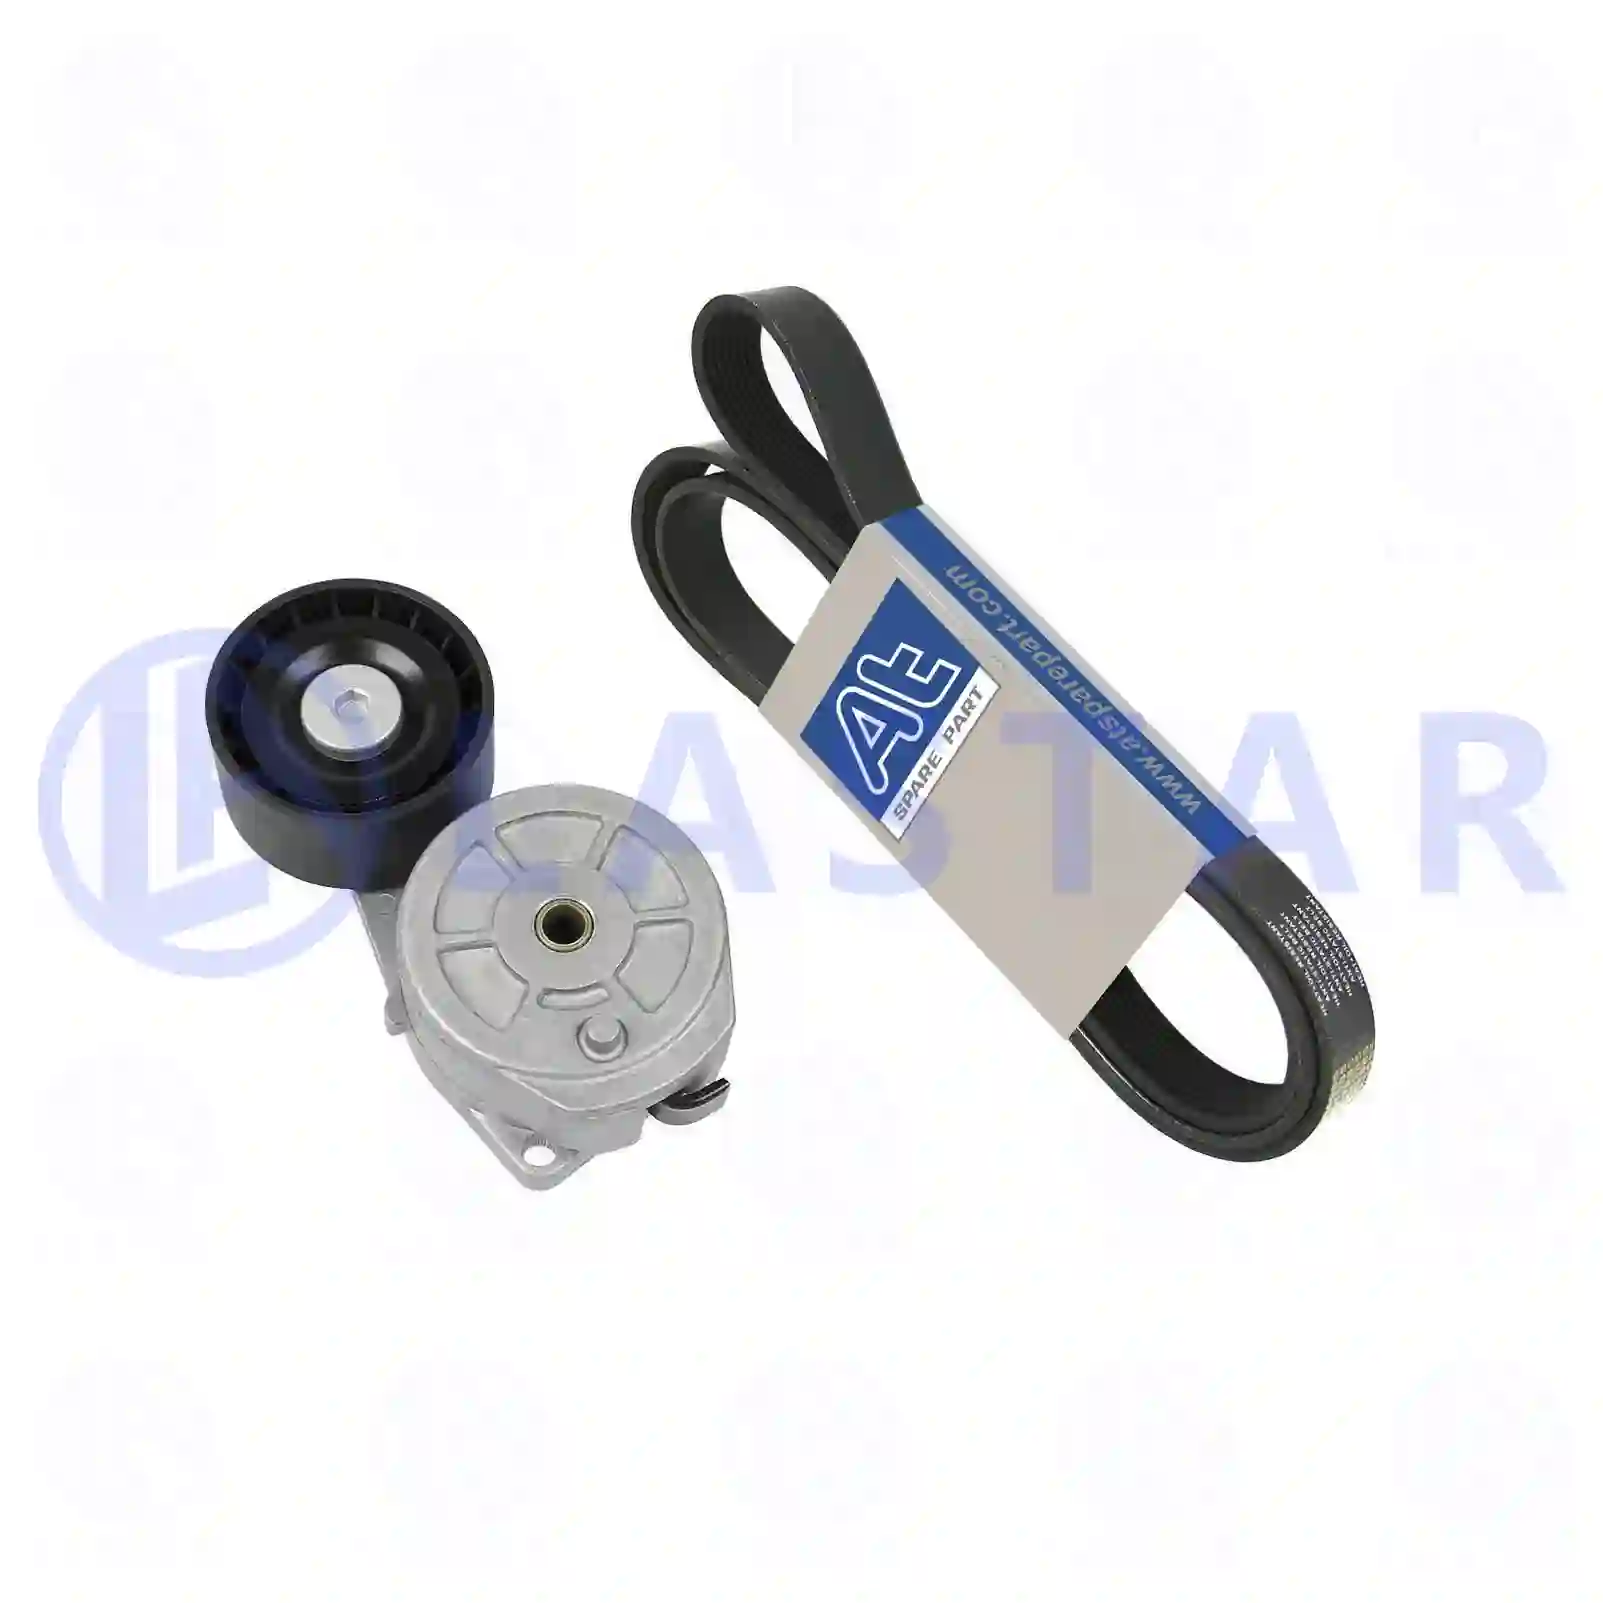 Belt tensioner, complete, with multiribbed belt, 77709953, 1512181S2, 1774650S2, 1774654S2, 1859657S2, 2197005S2 ||  77709953 Lastar Spare Part | Truck Spare Parts, Auotomotive Spare Parts Belt tensioner, complete, with multiribbed belt, 77709953, 1512181S2, 1774650S2, 1774654S2, 1859657S2, 2197005S2 ||  77709953 Lastar Spare Part | Truck Spare Parts, Auotomotive Spare Parts